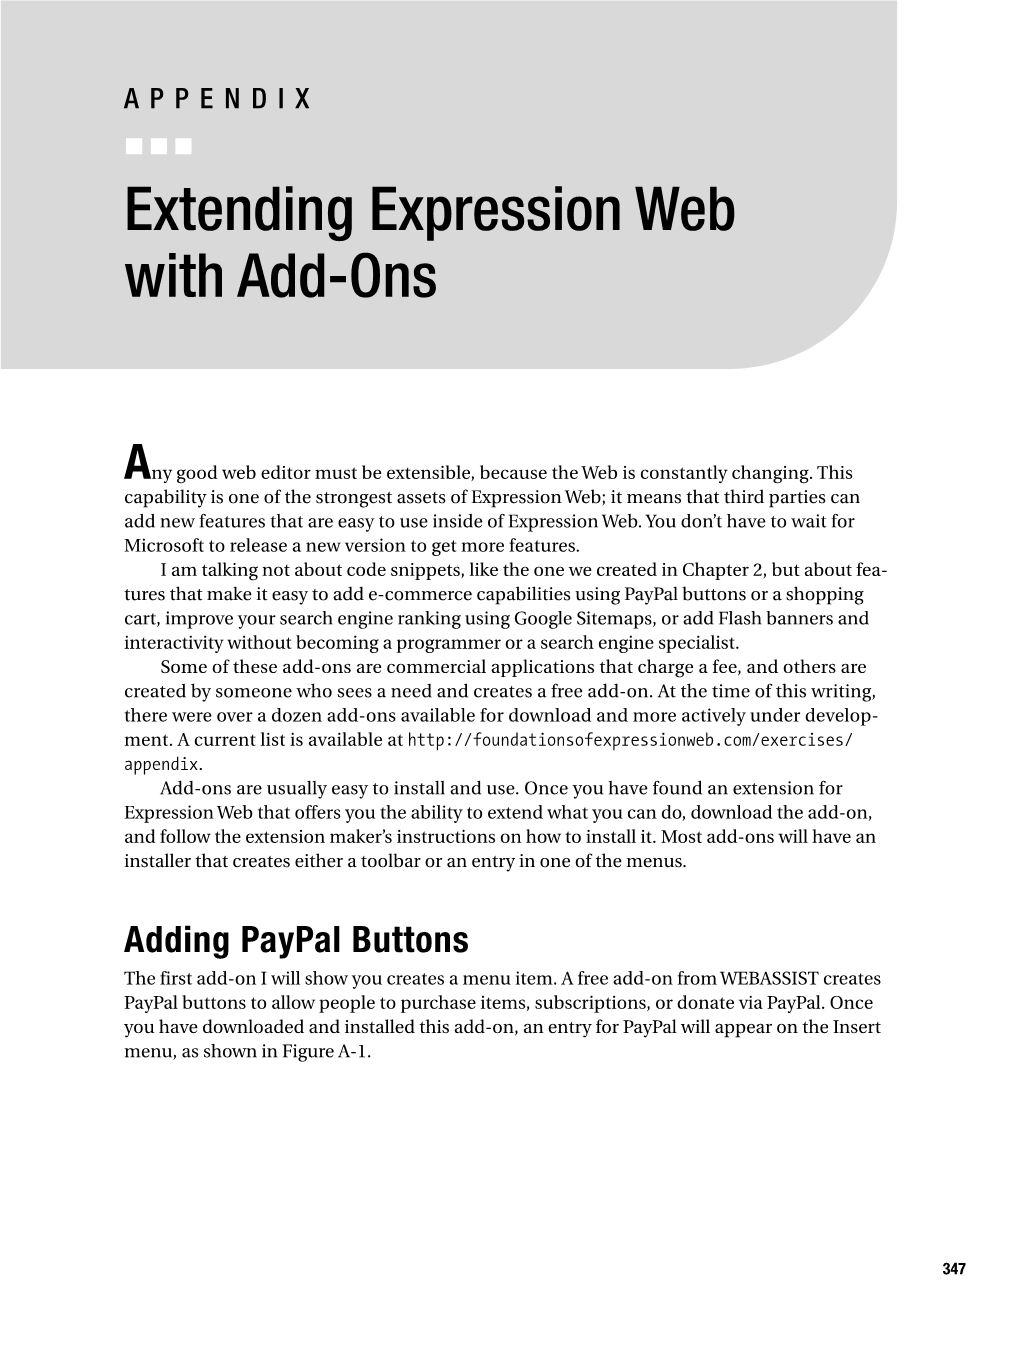 Extending Expression Web with Add-Ons